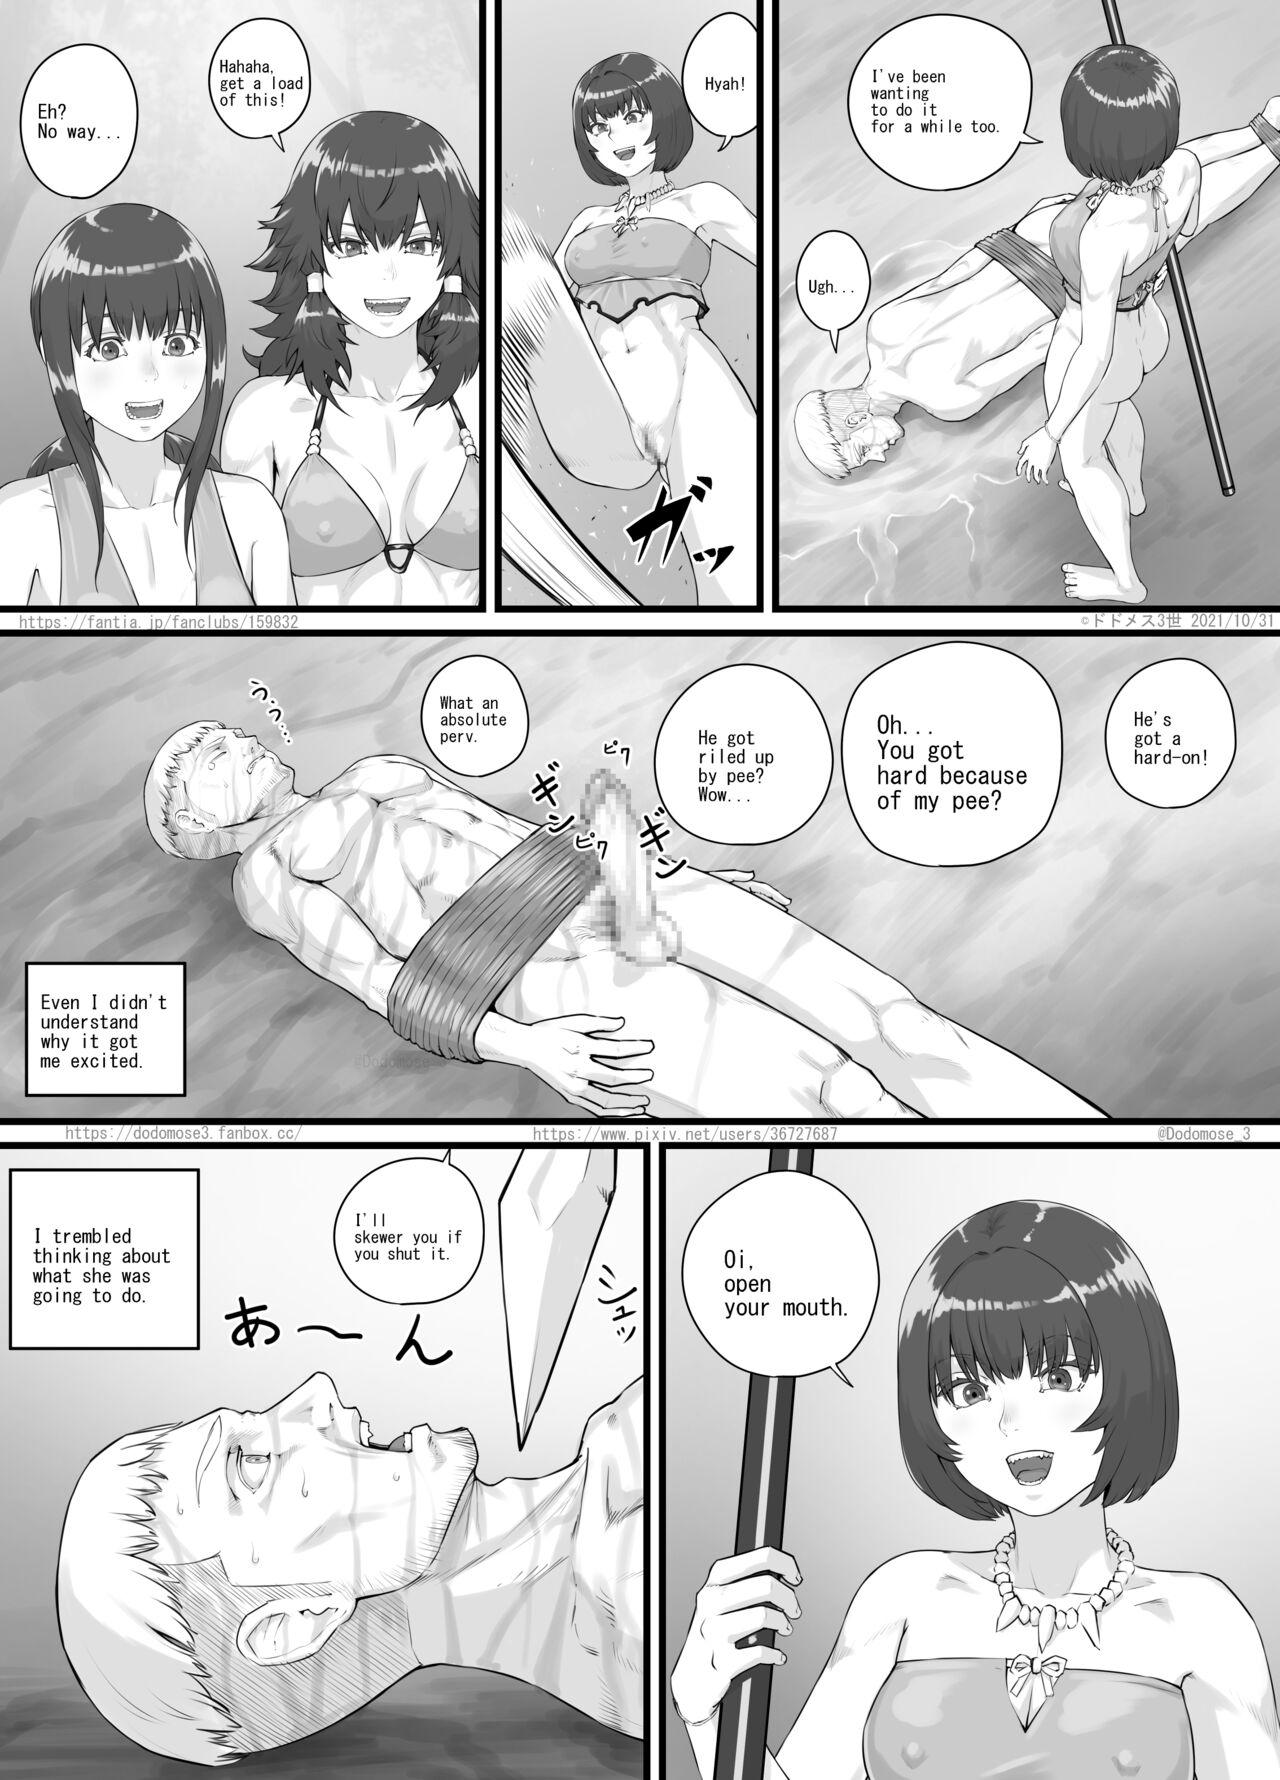 Story アマゾネス漫画（English Version） - Original Hoe - Page 11